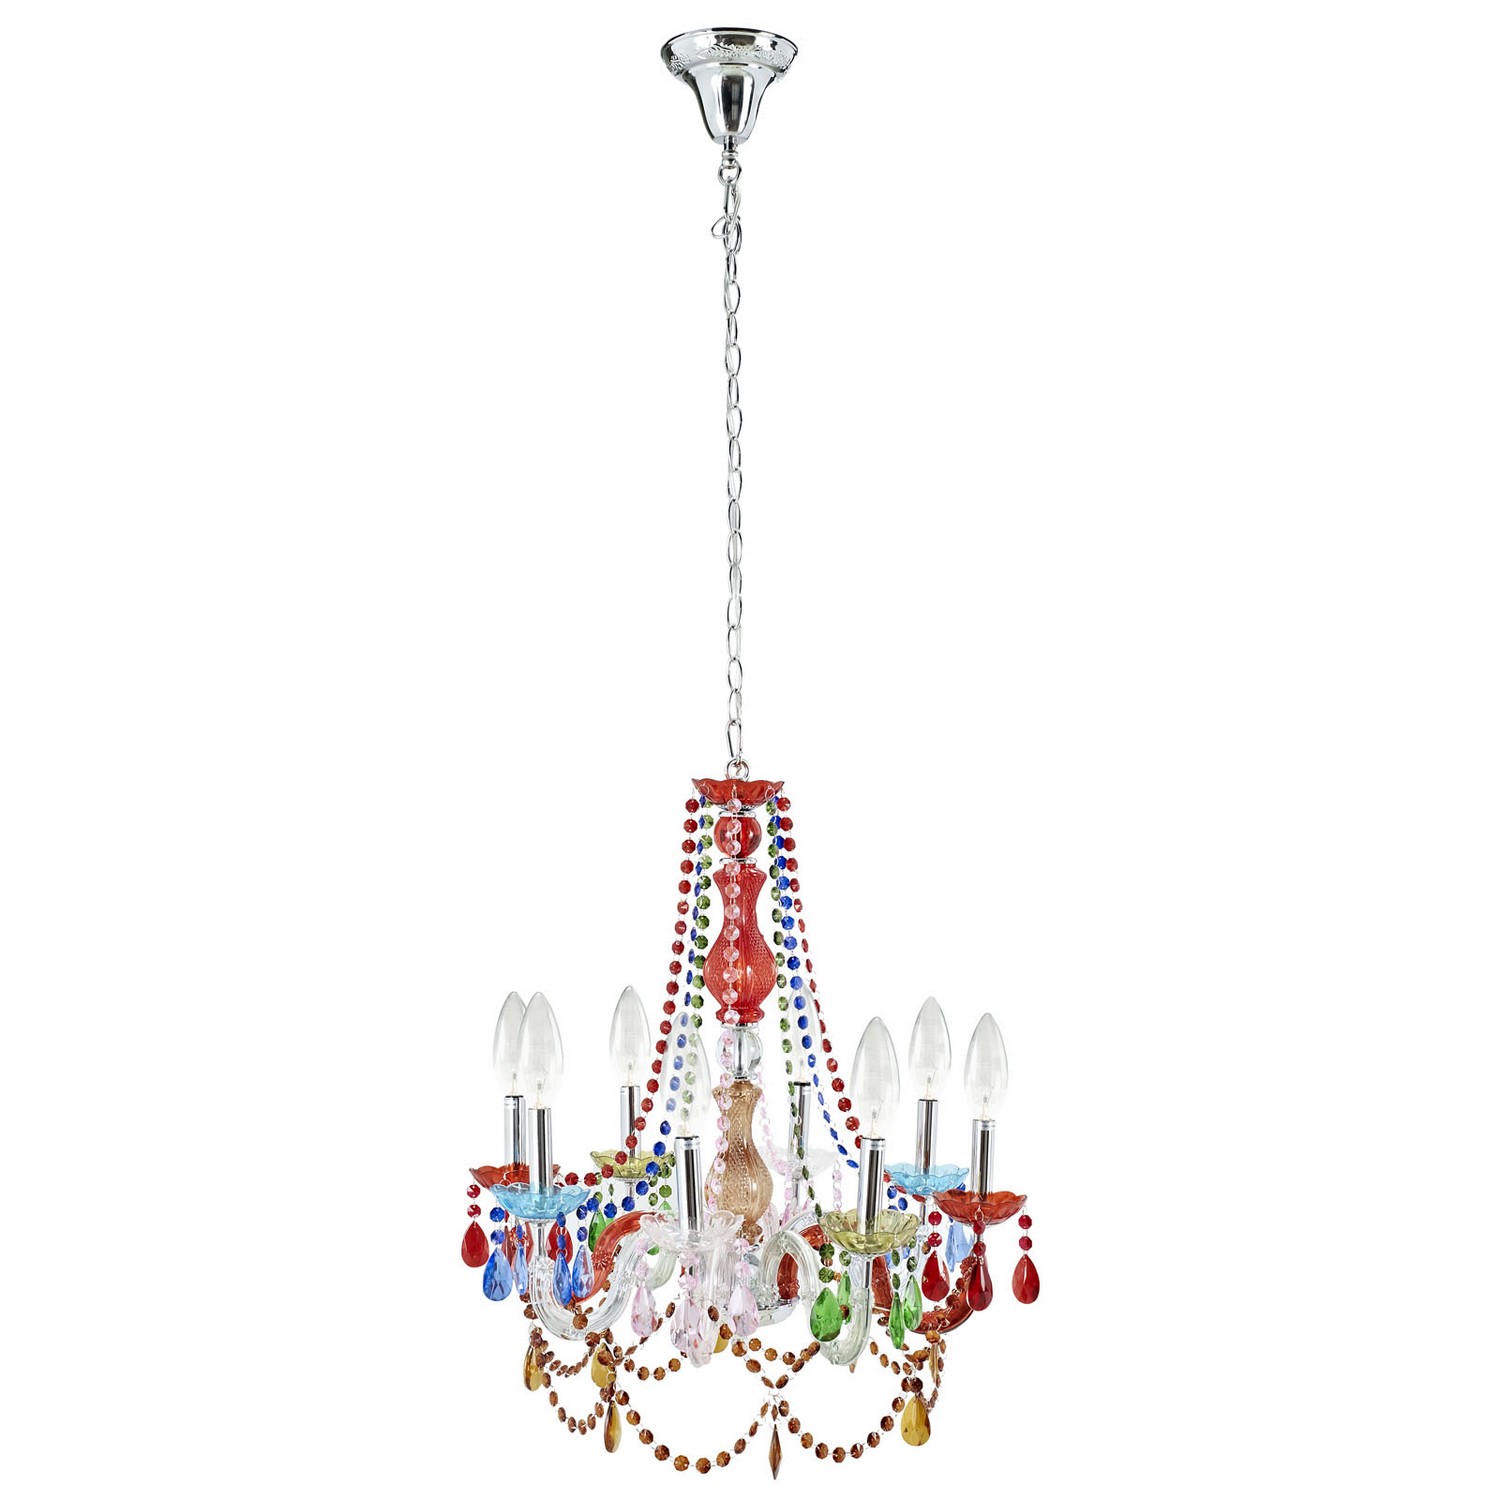 Modway Palace Acrylic Chandelier - Multicolored